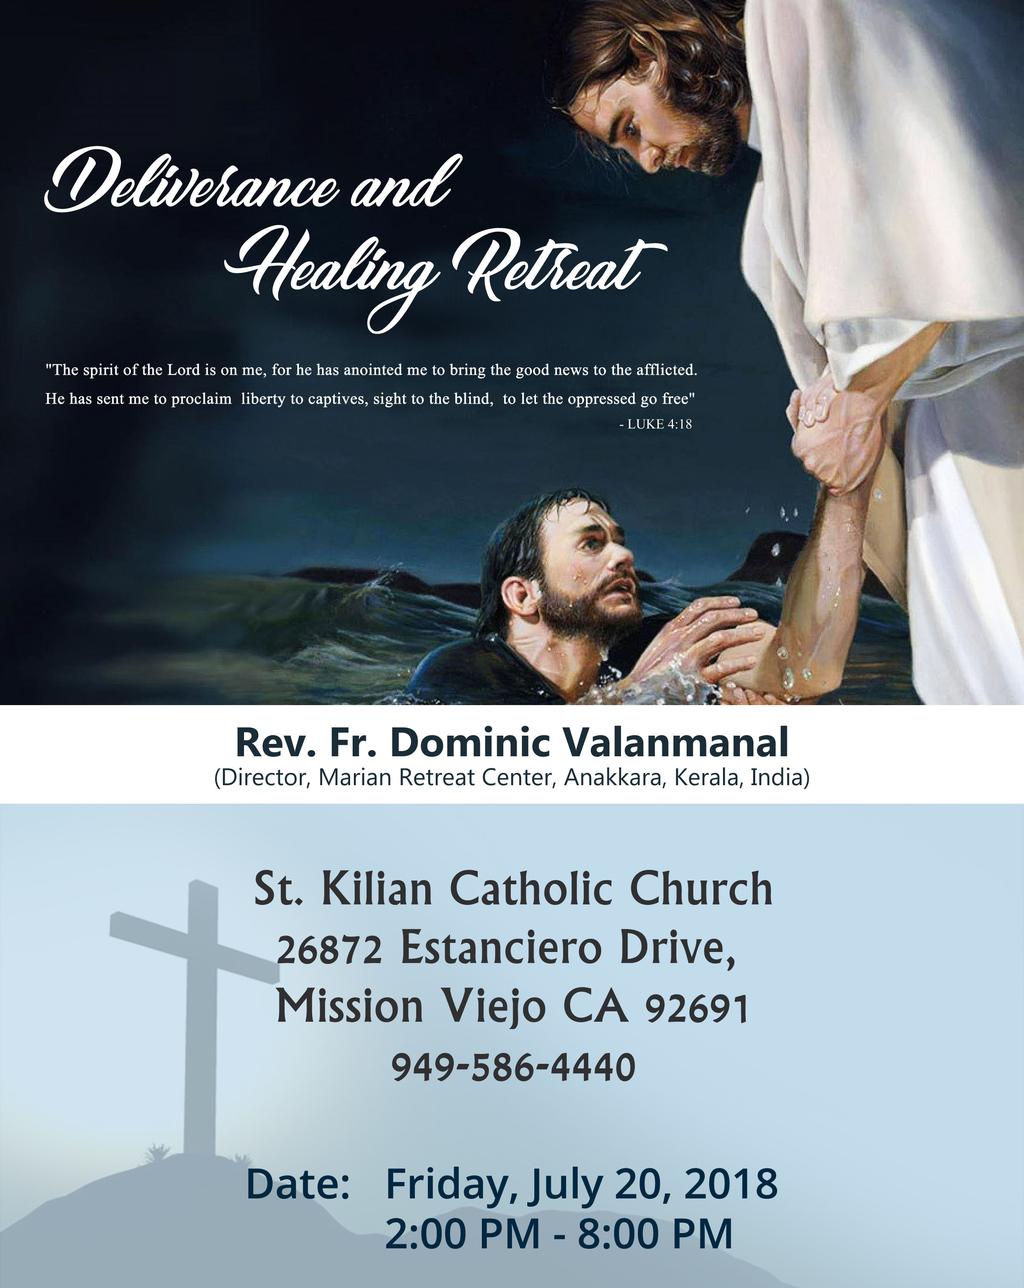 Come for an afternoon of healing! Fr.